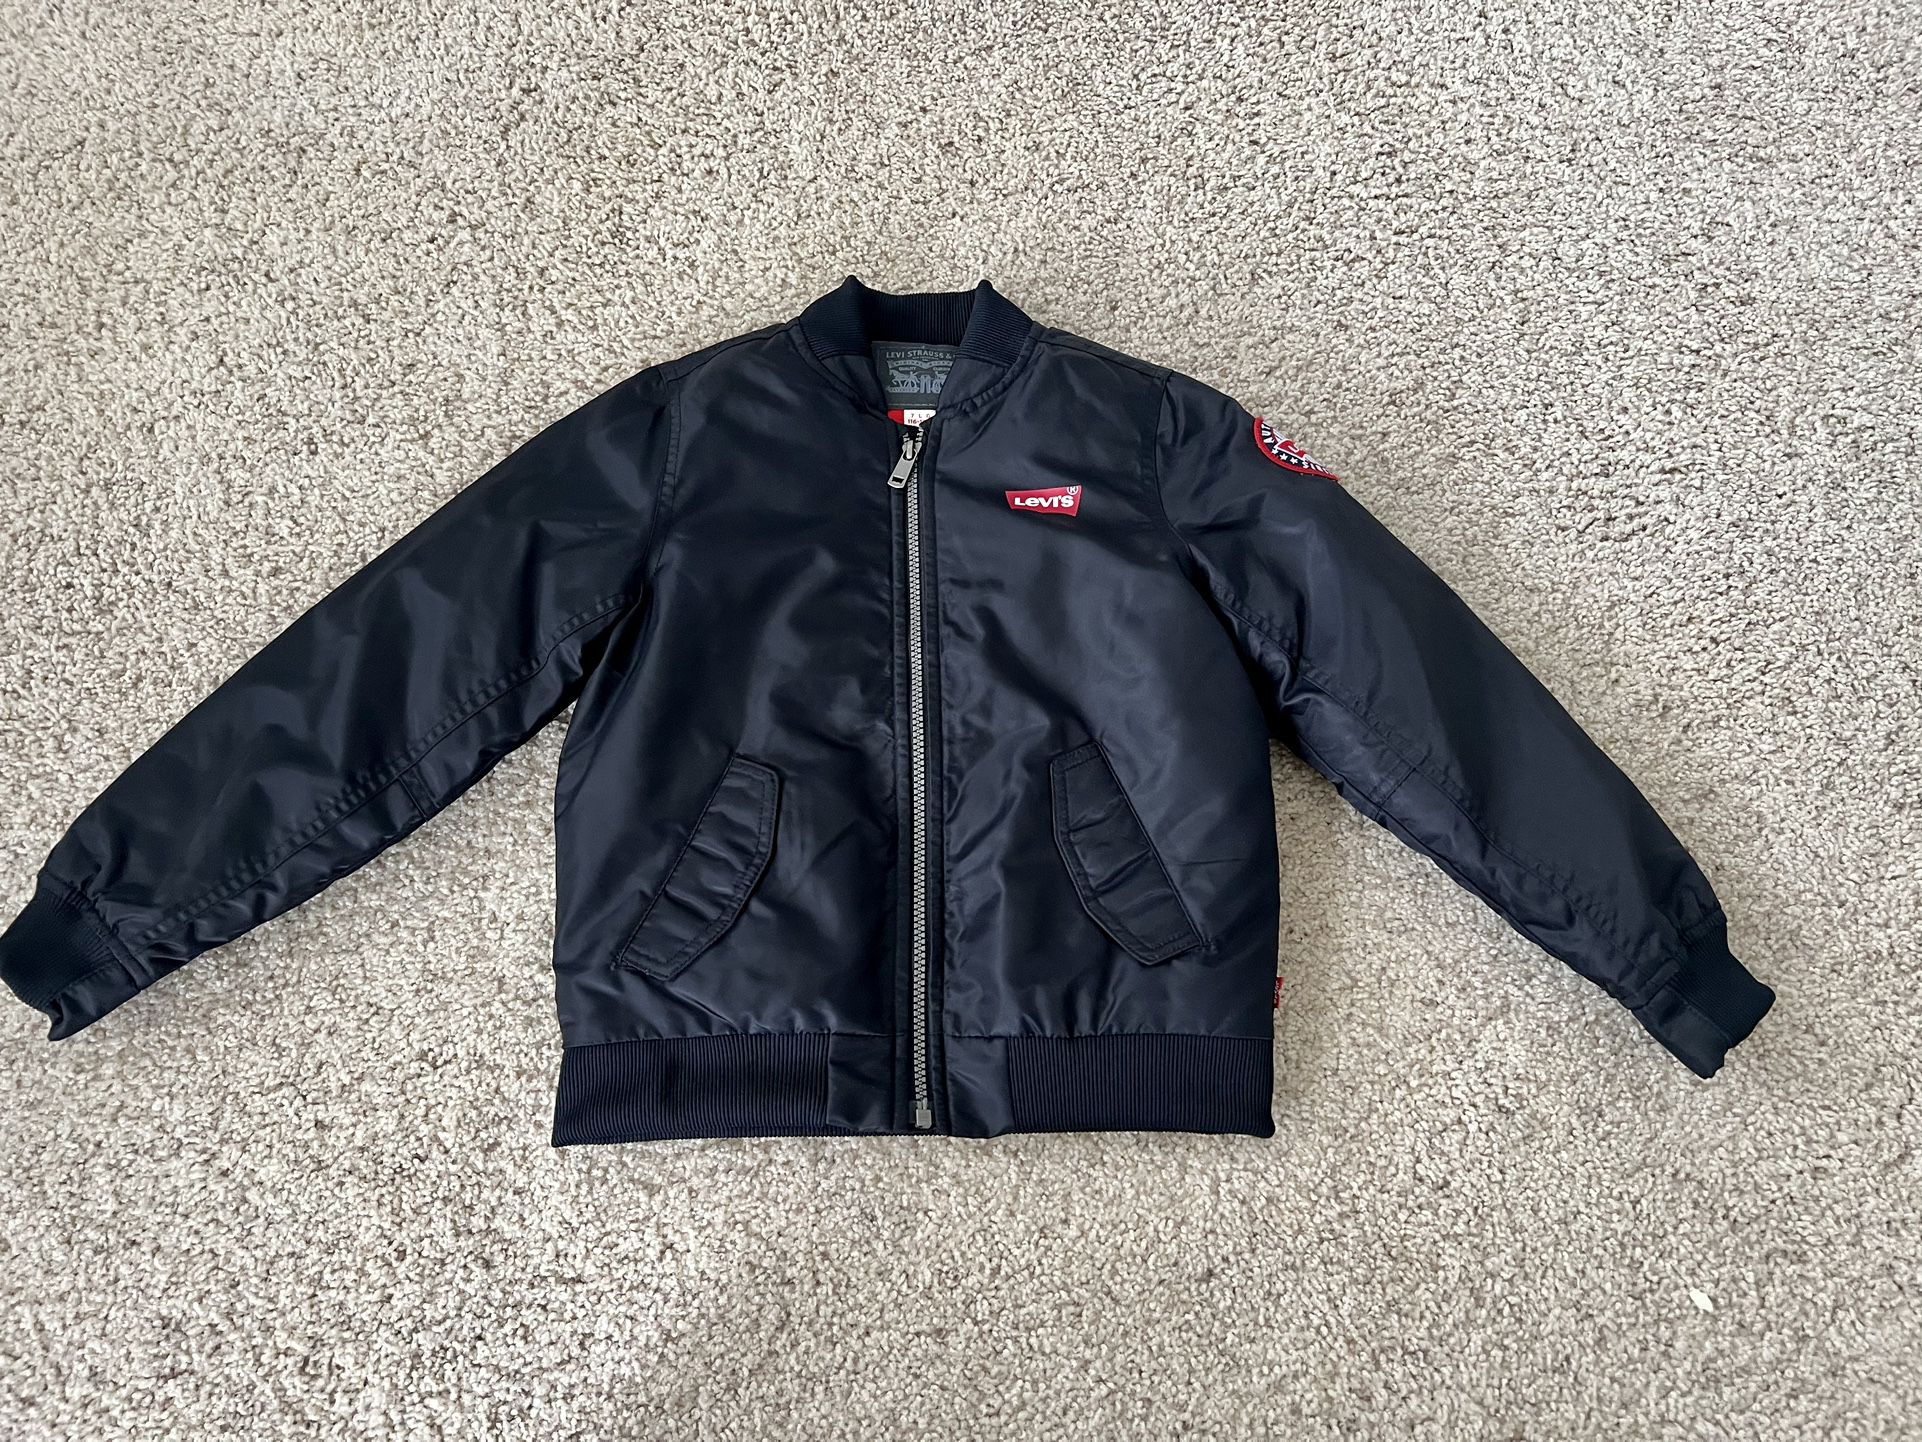 Levi’s Waterproof Jacket for boys 6-7 years old.